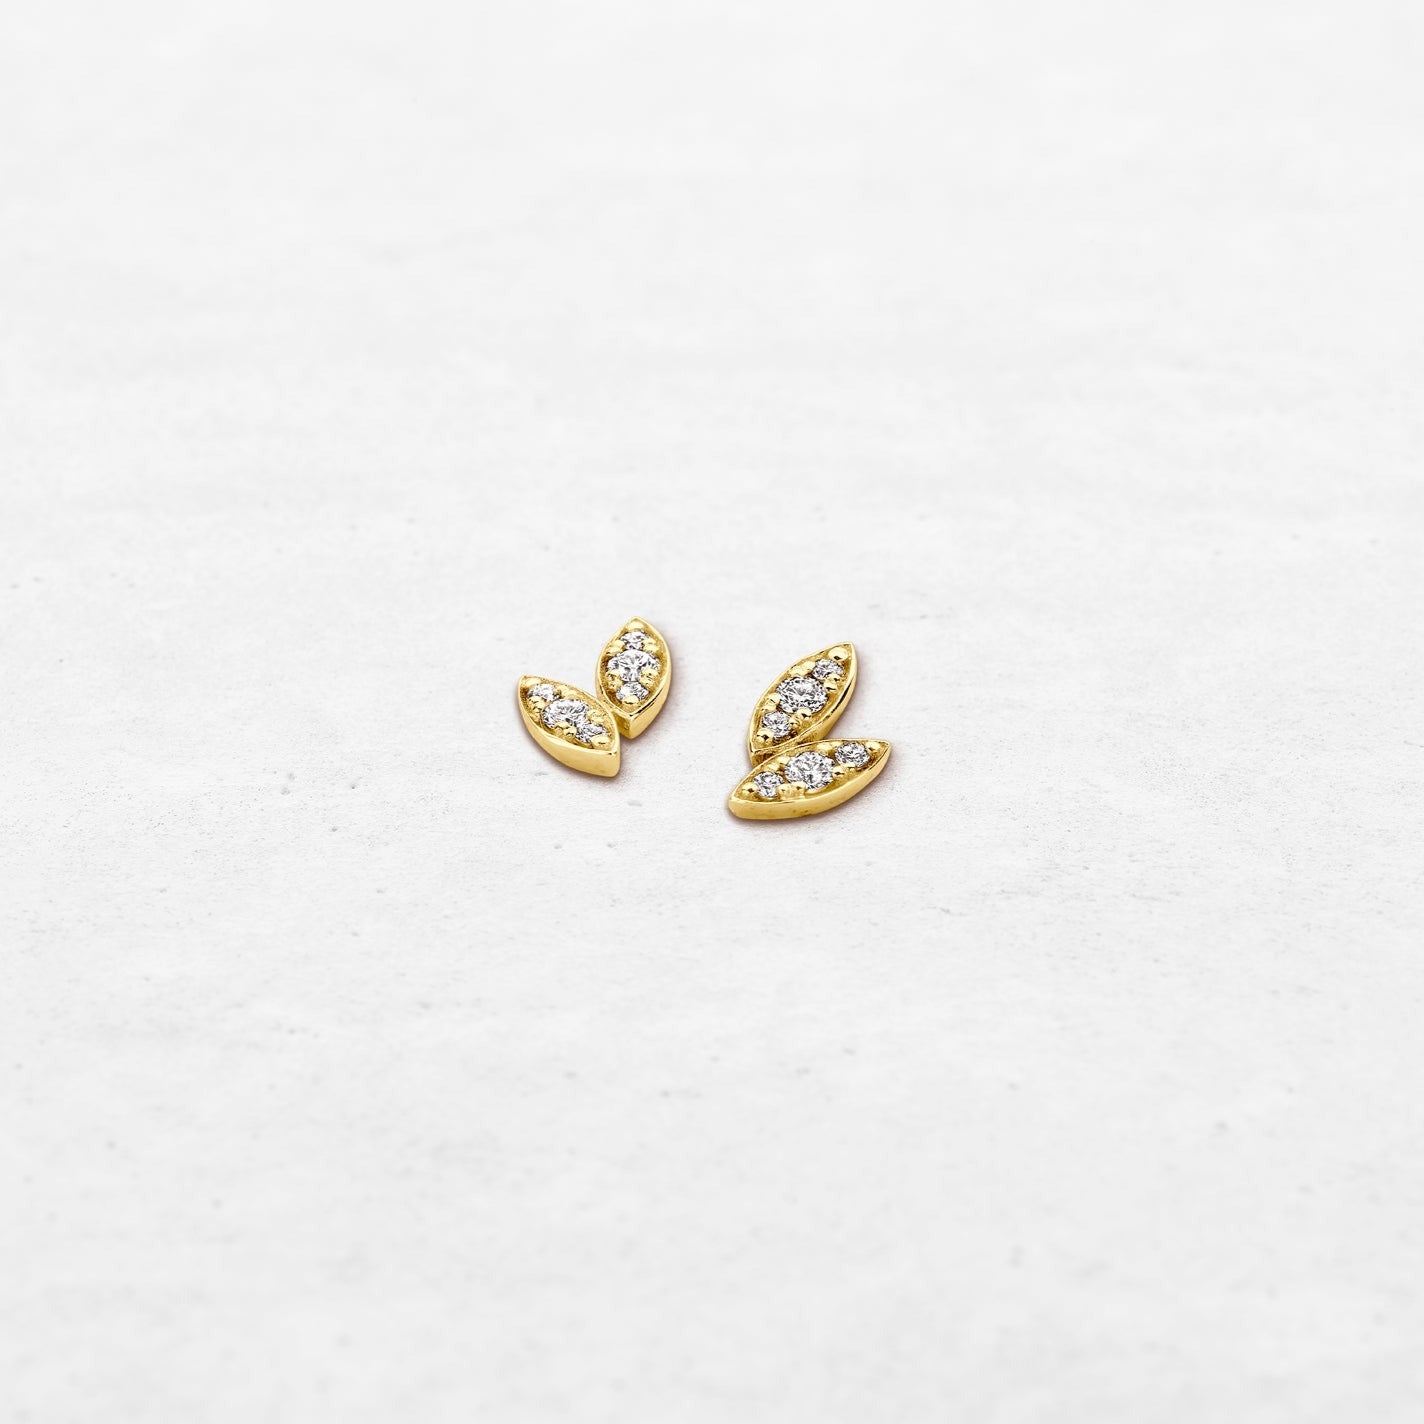 Double diamond leaf earring studs in yellow gold made by O! Jewelry